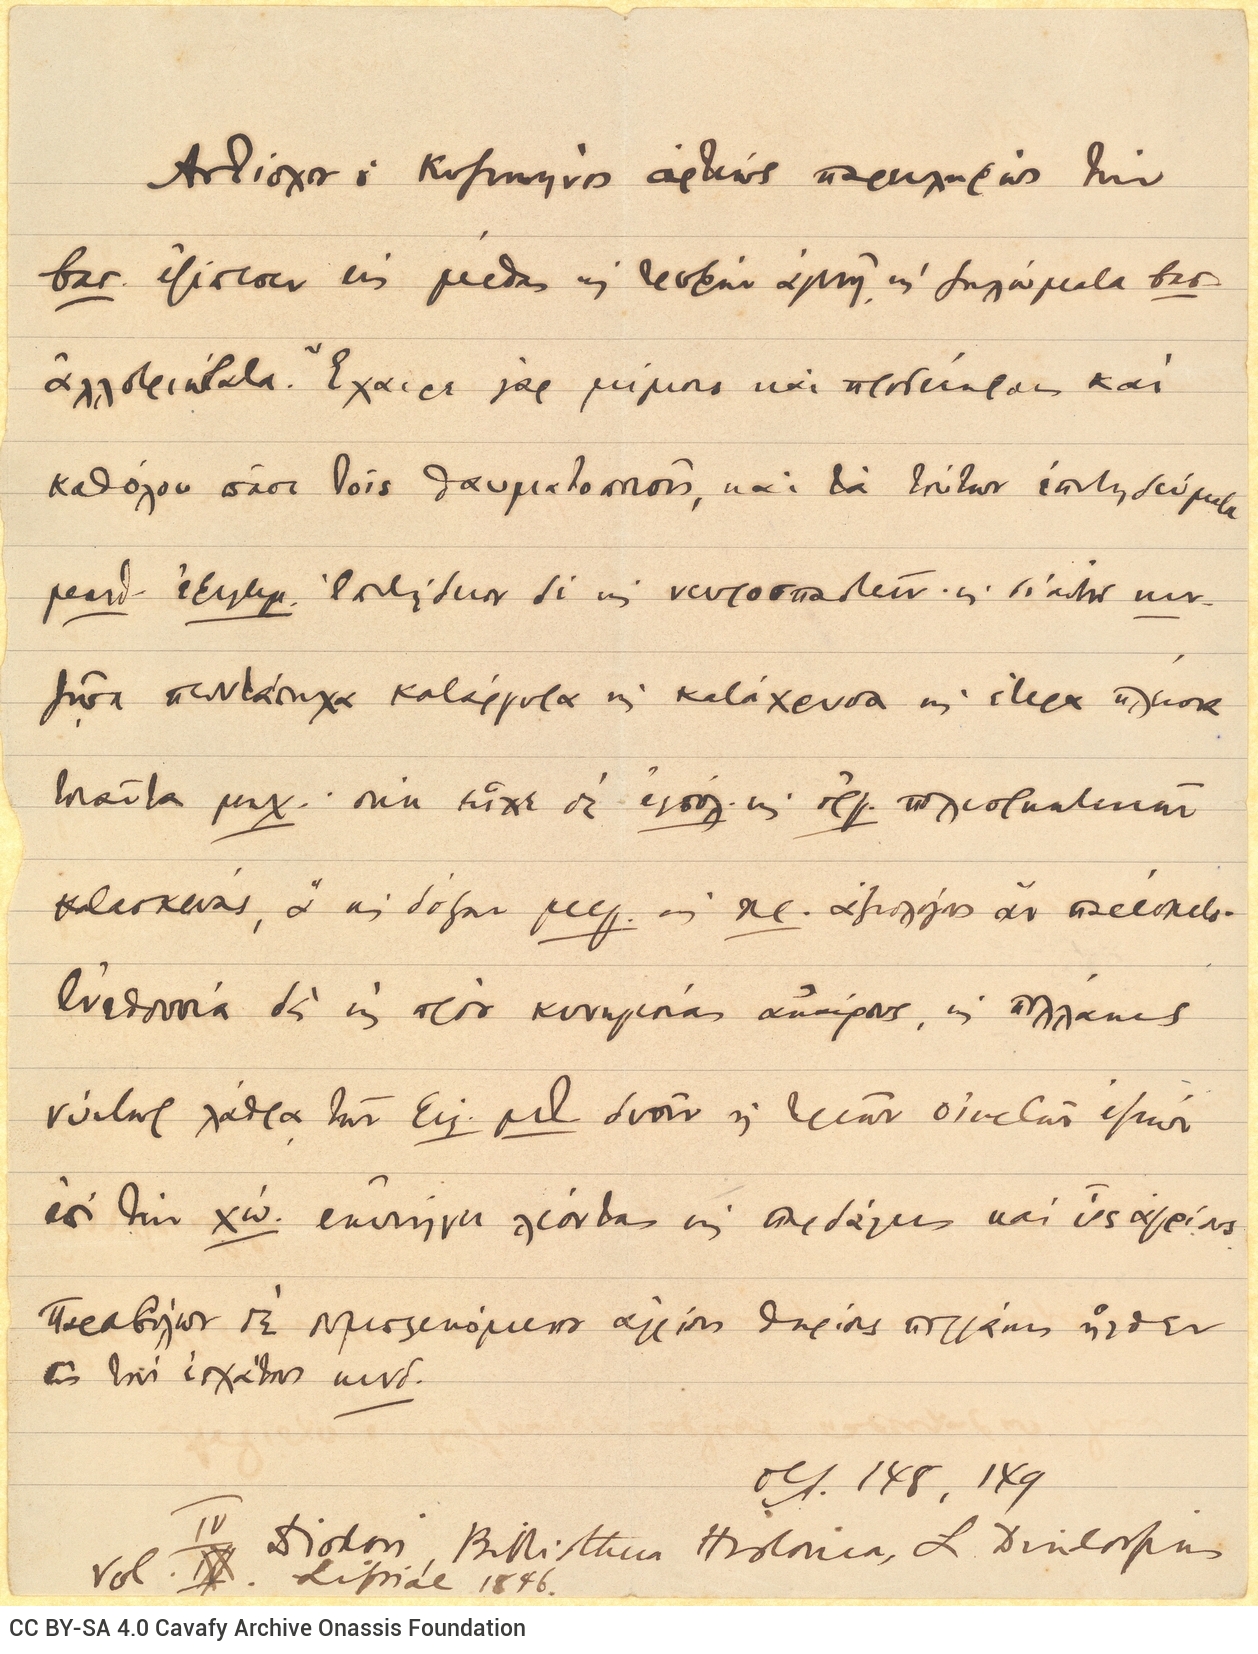 Handwritten draft of the poem "Antiochus the Cyzicene" on one side of two small pieces of paper. Handwritten quote on one 